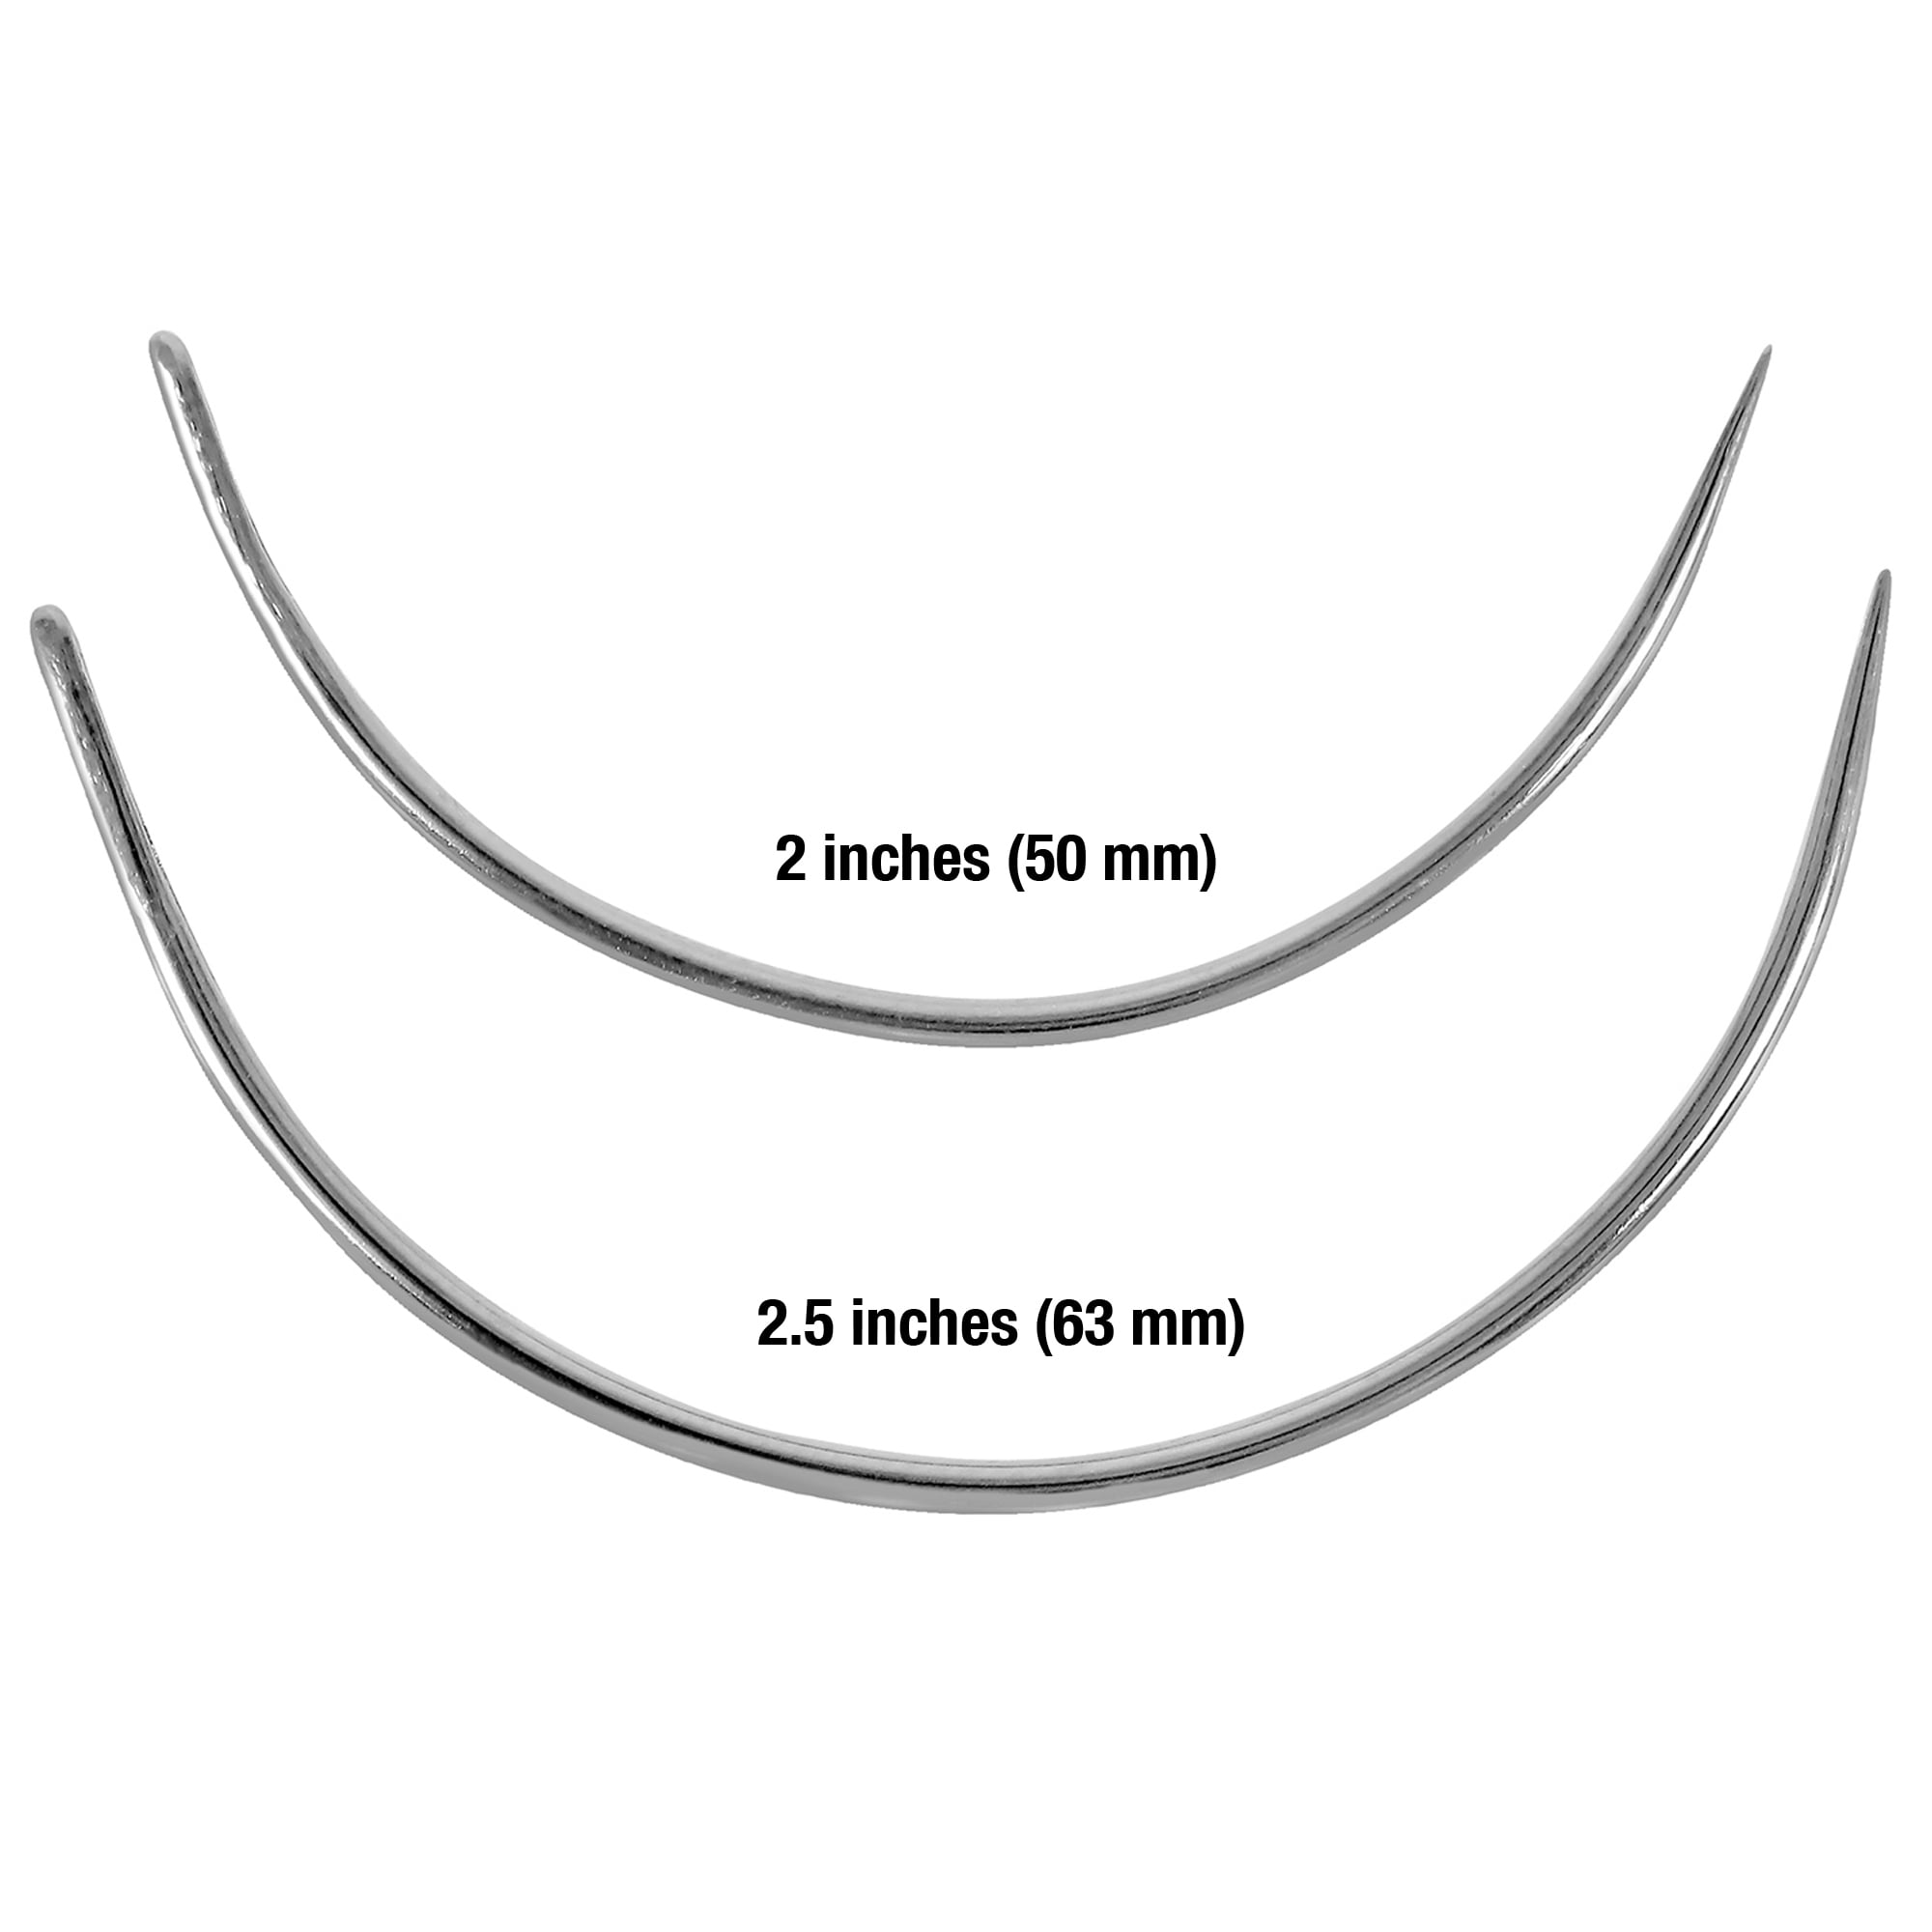 Industrial Curved Needle, Curved Needles Sewing with Thick Handle, Widened  Metal Hook Needle - Sewing Machine Curved Needle, Industrial Sewing Machine